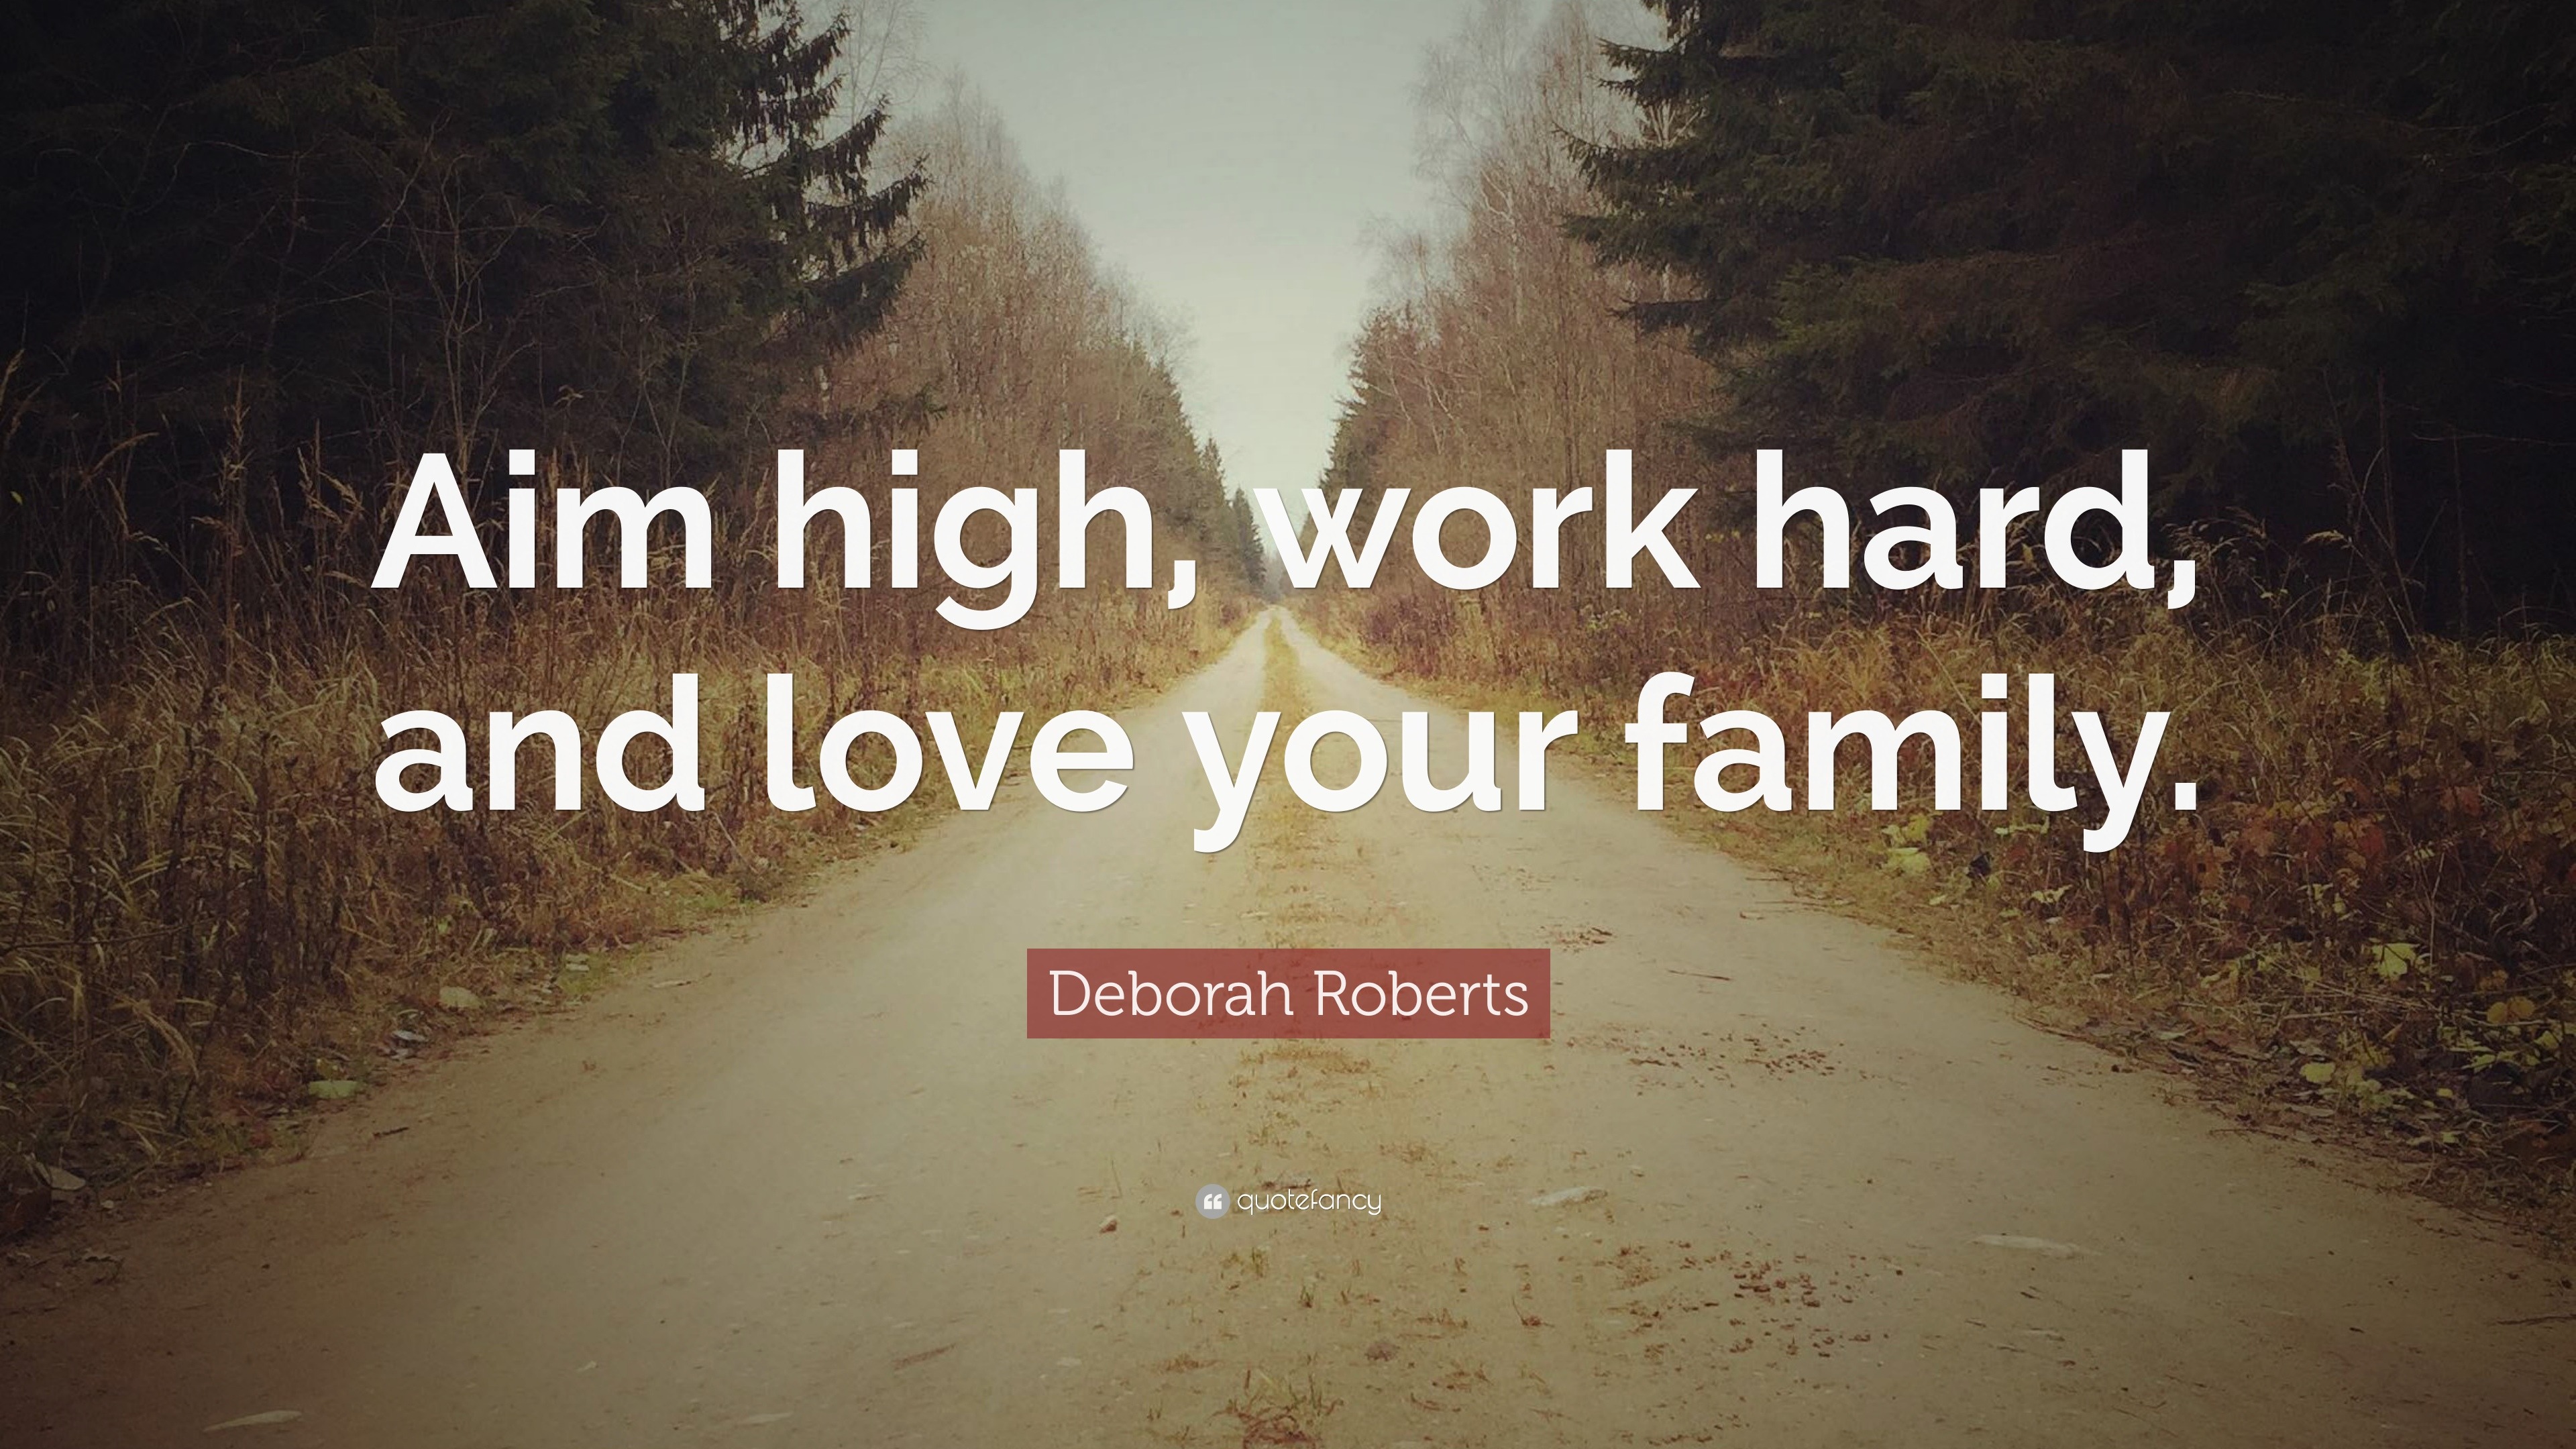 Deborah Roberts Quote “Aim high work hard and love your family